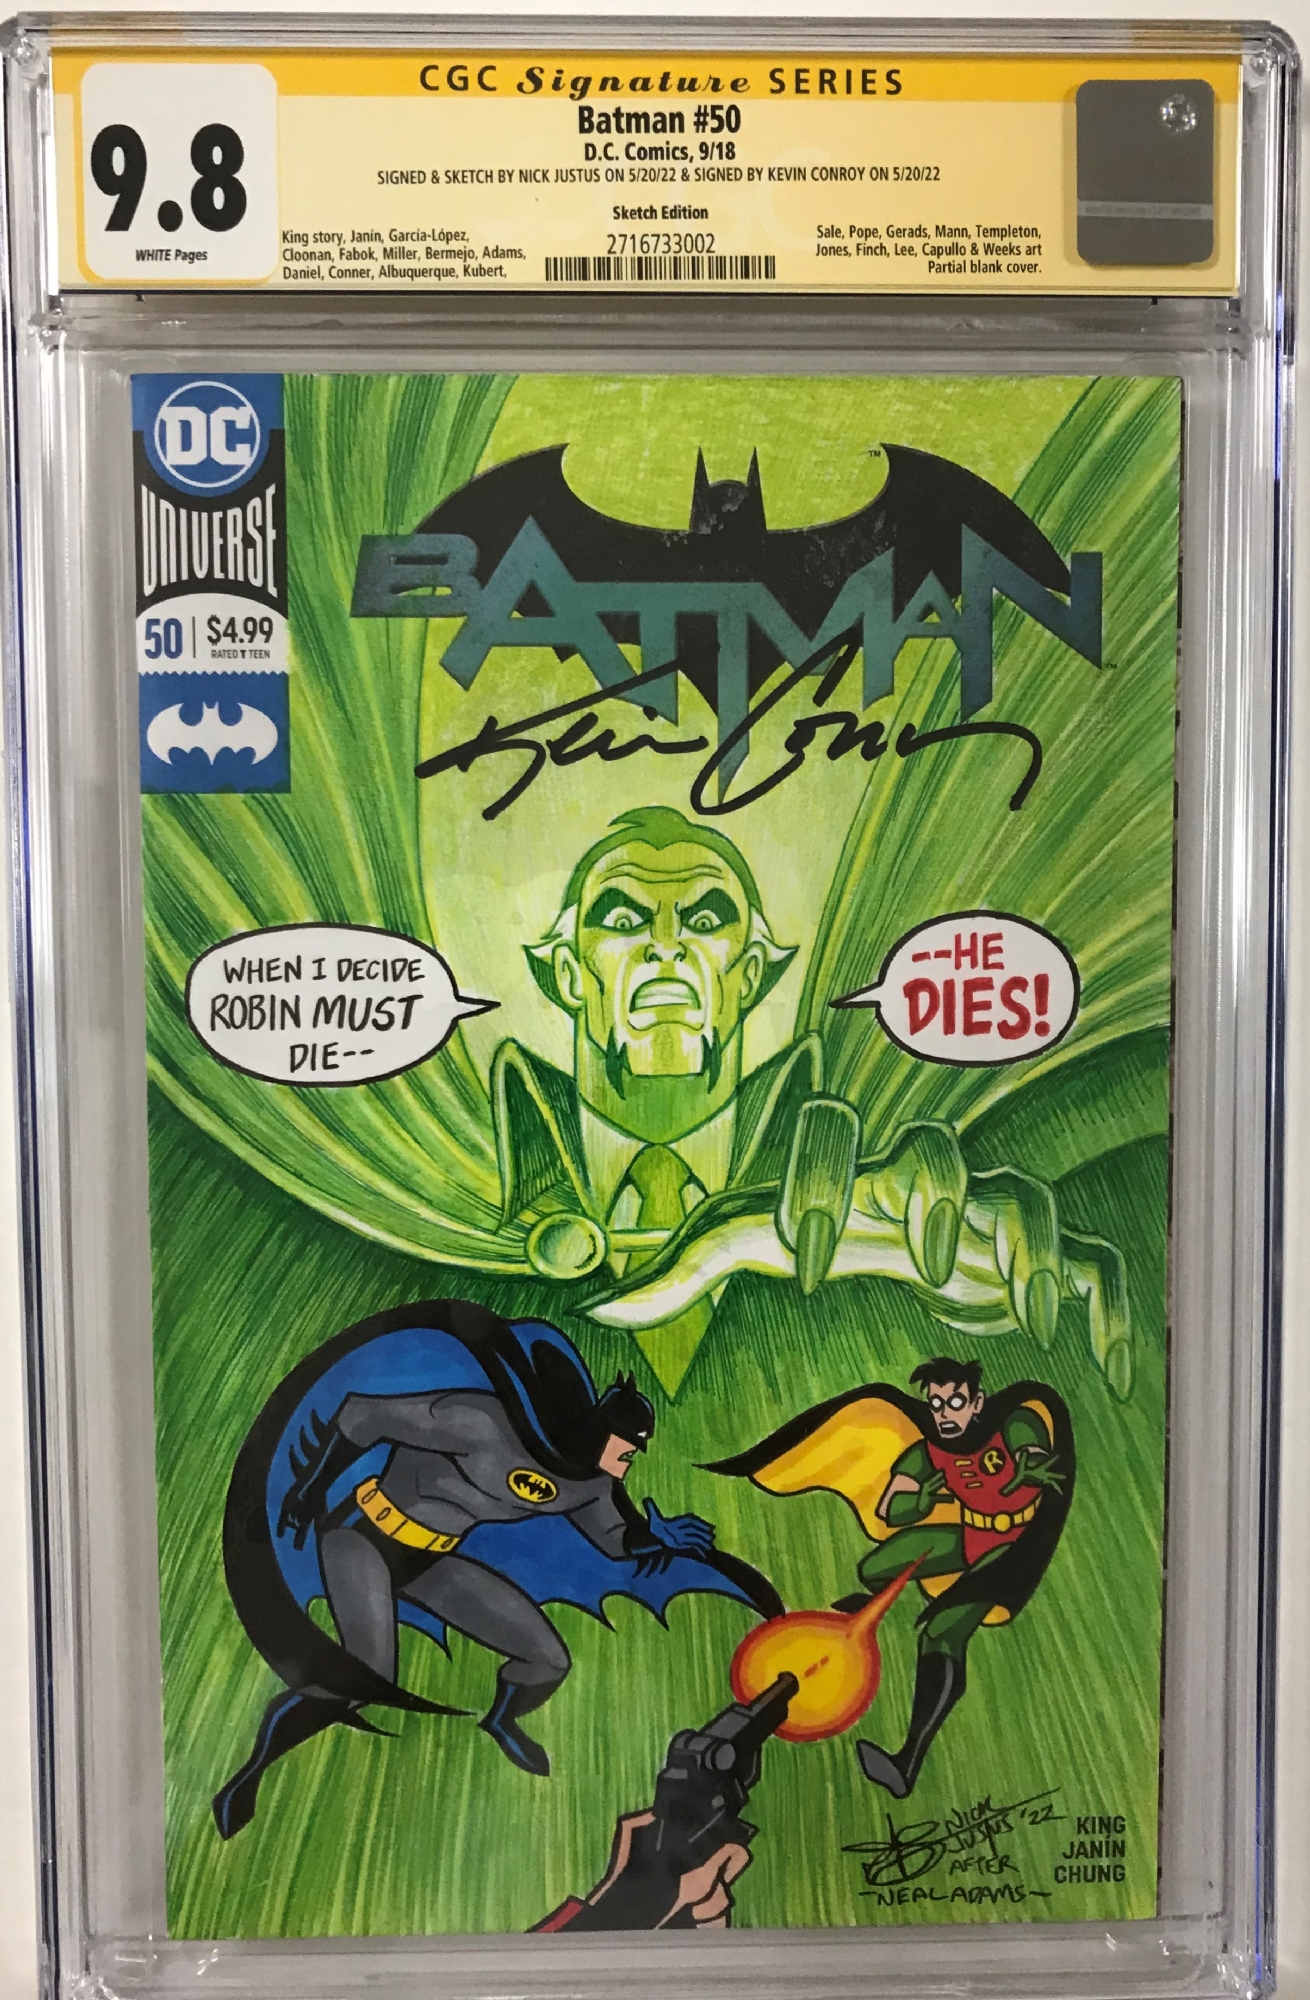 Batman #232 cover recreation by Nick Justus, signed by Kevin Conroy, in Ron  Chmiel's Ron's Sketch Covers Comic Art Gallery Room